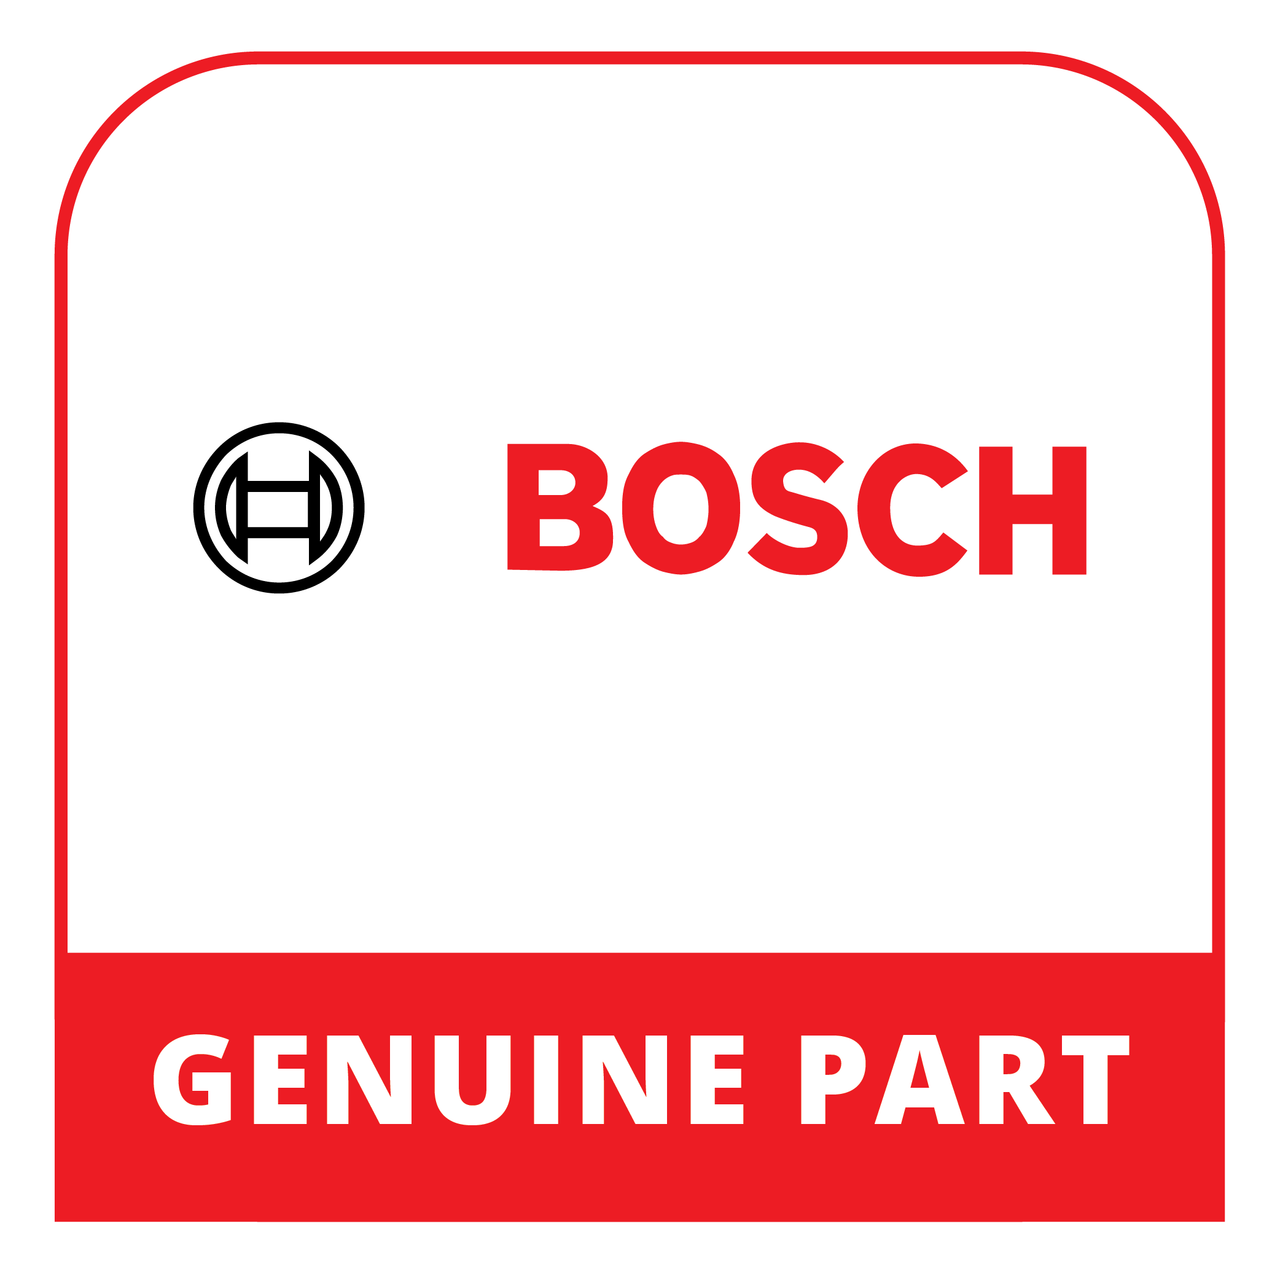 Bosch (Thermador) 12004817 - Pc Board Assembly-Mains Power - Genuine Bosch (Thermador) Part